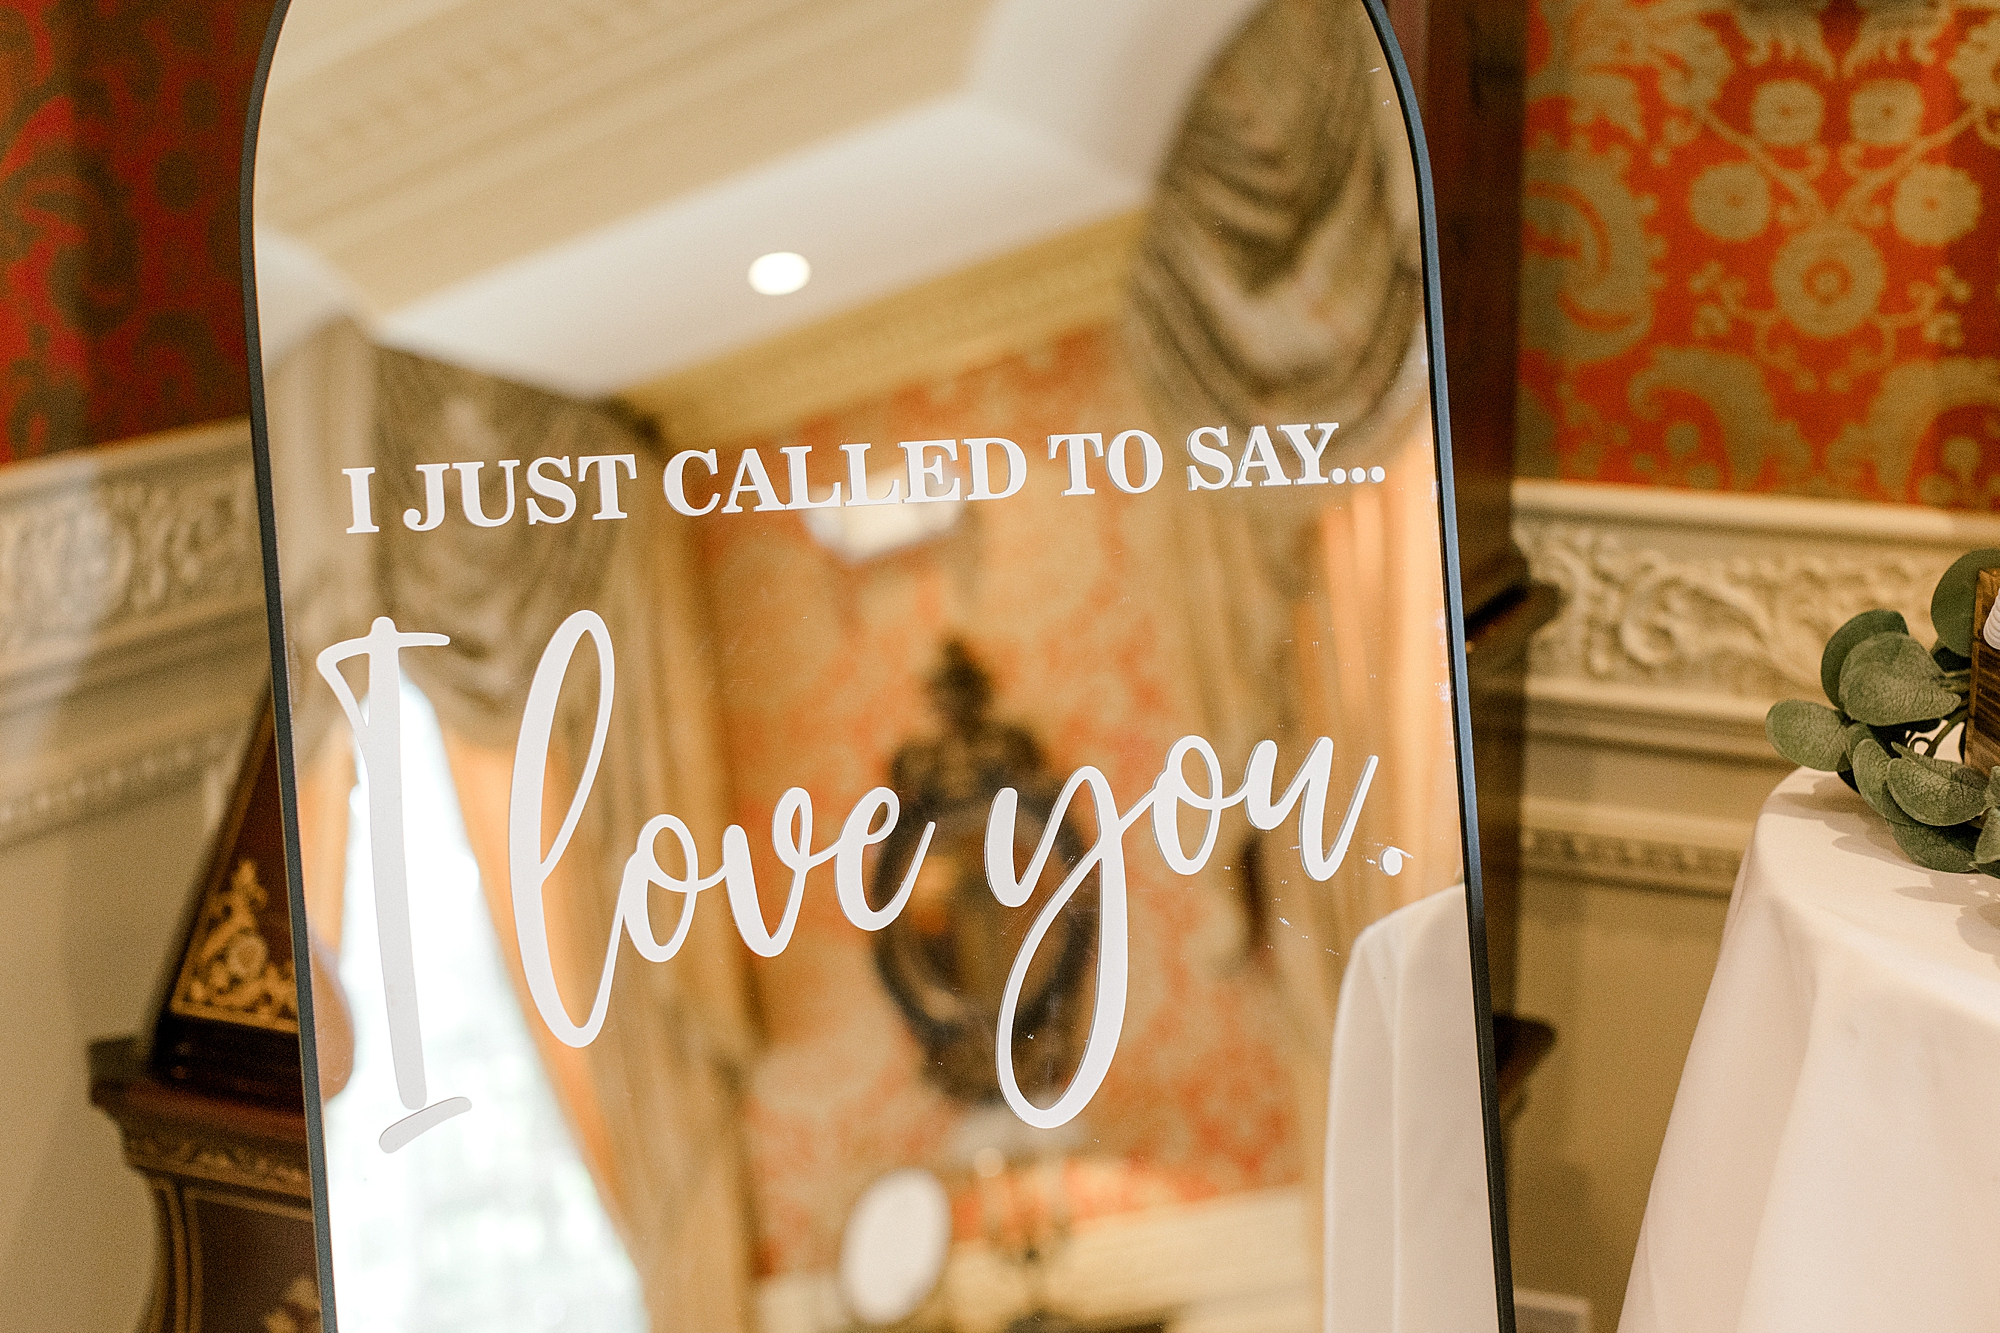 mirror with gold frame that says "I just called to say... I love you"